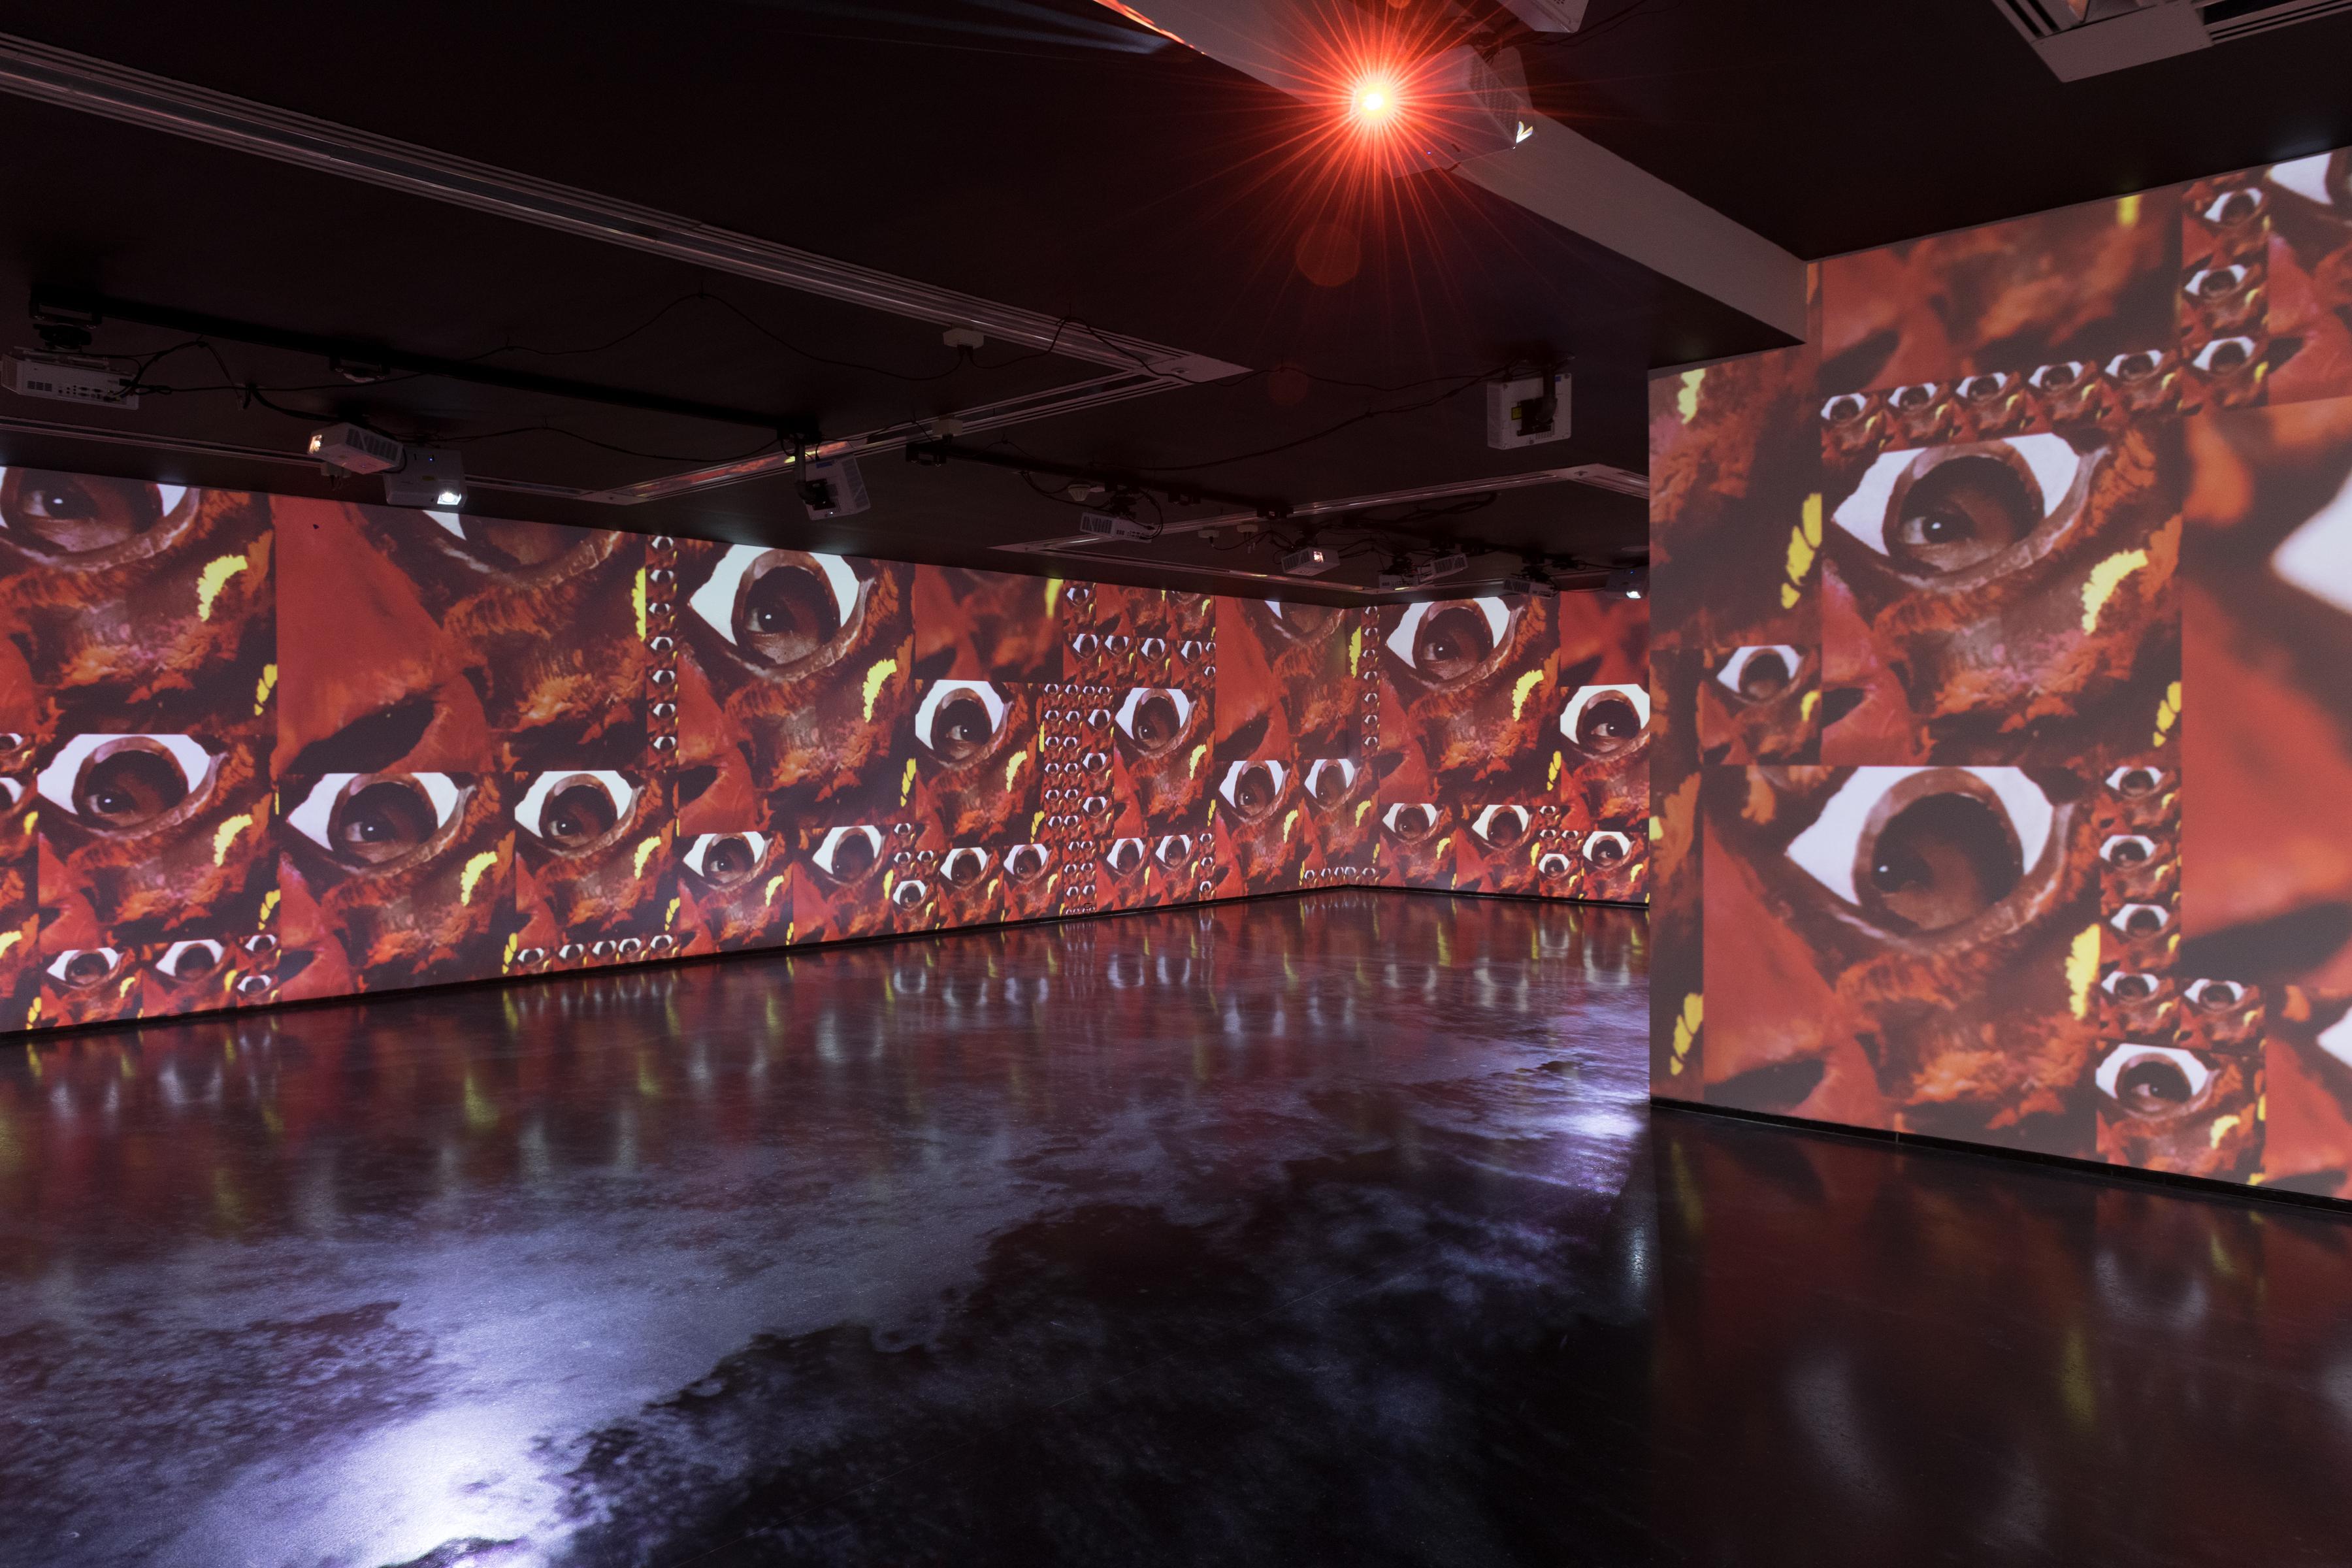 darkened gallery with walls fully lit with projections of artwork